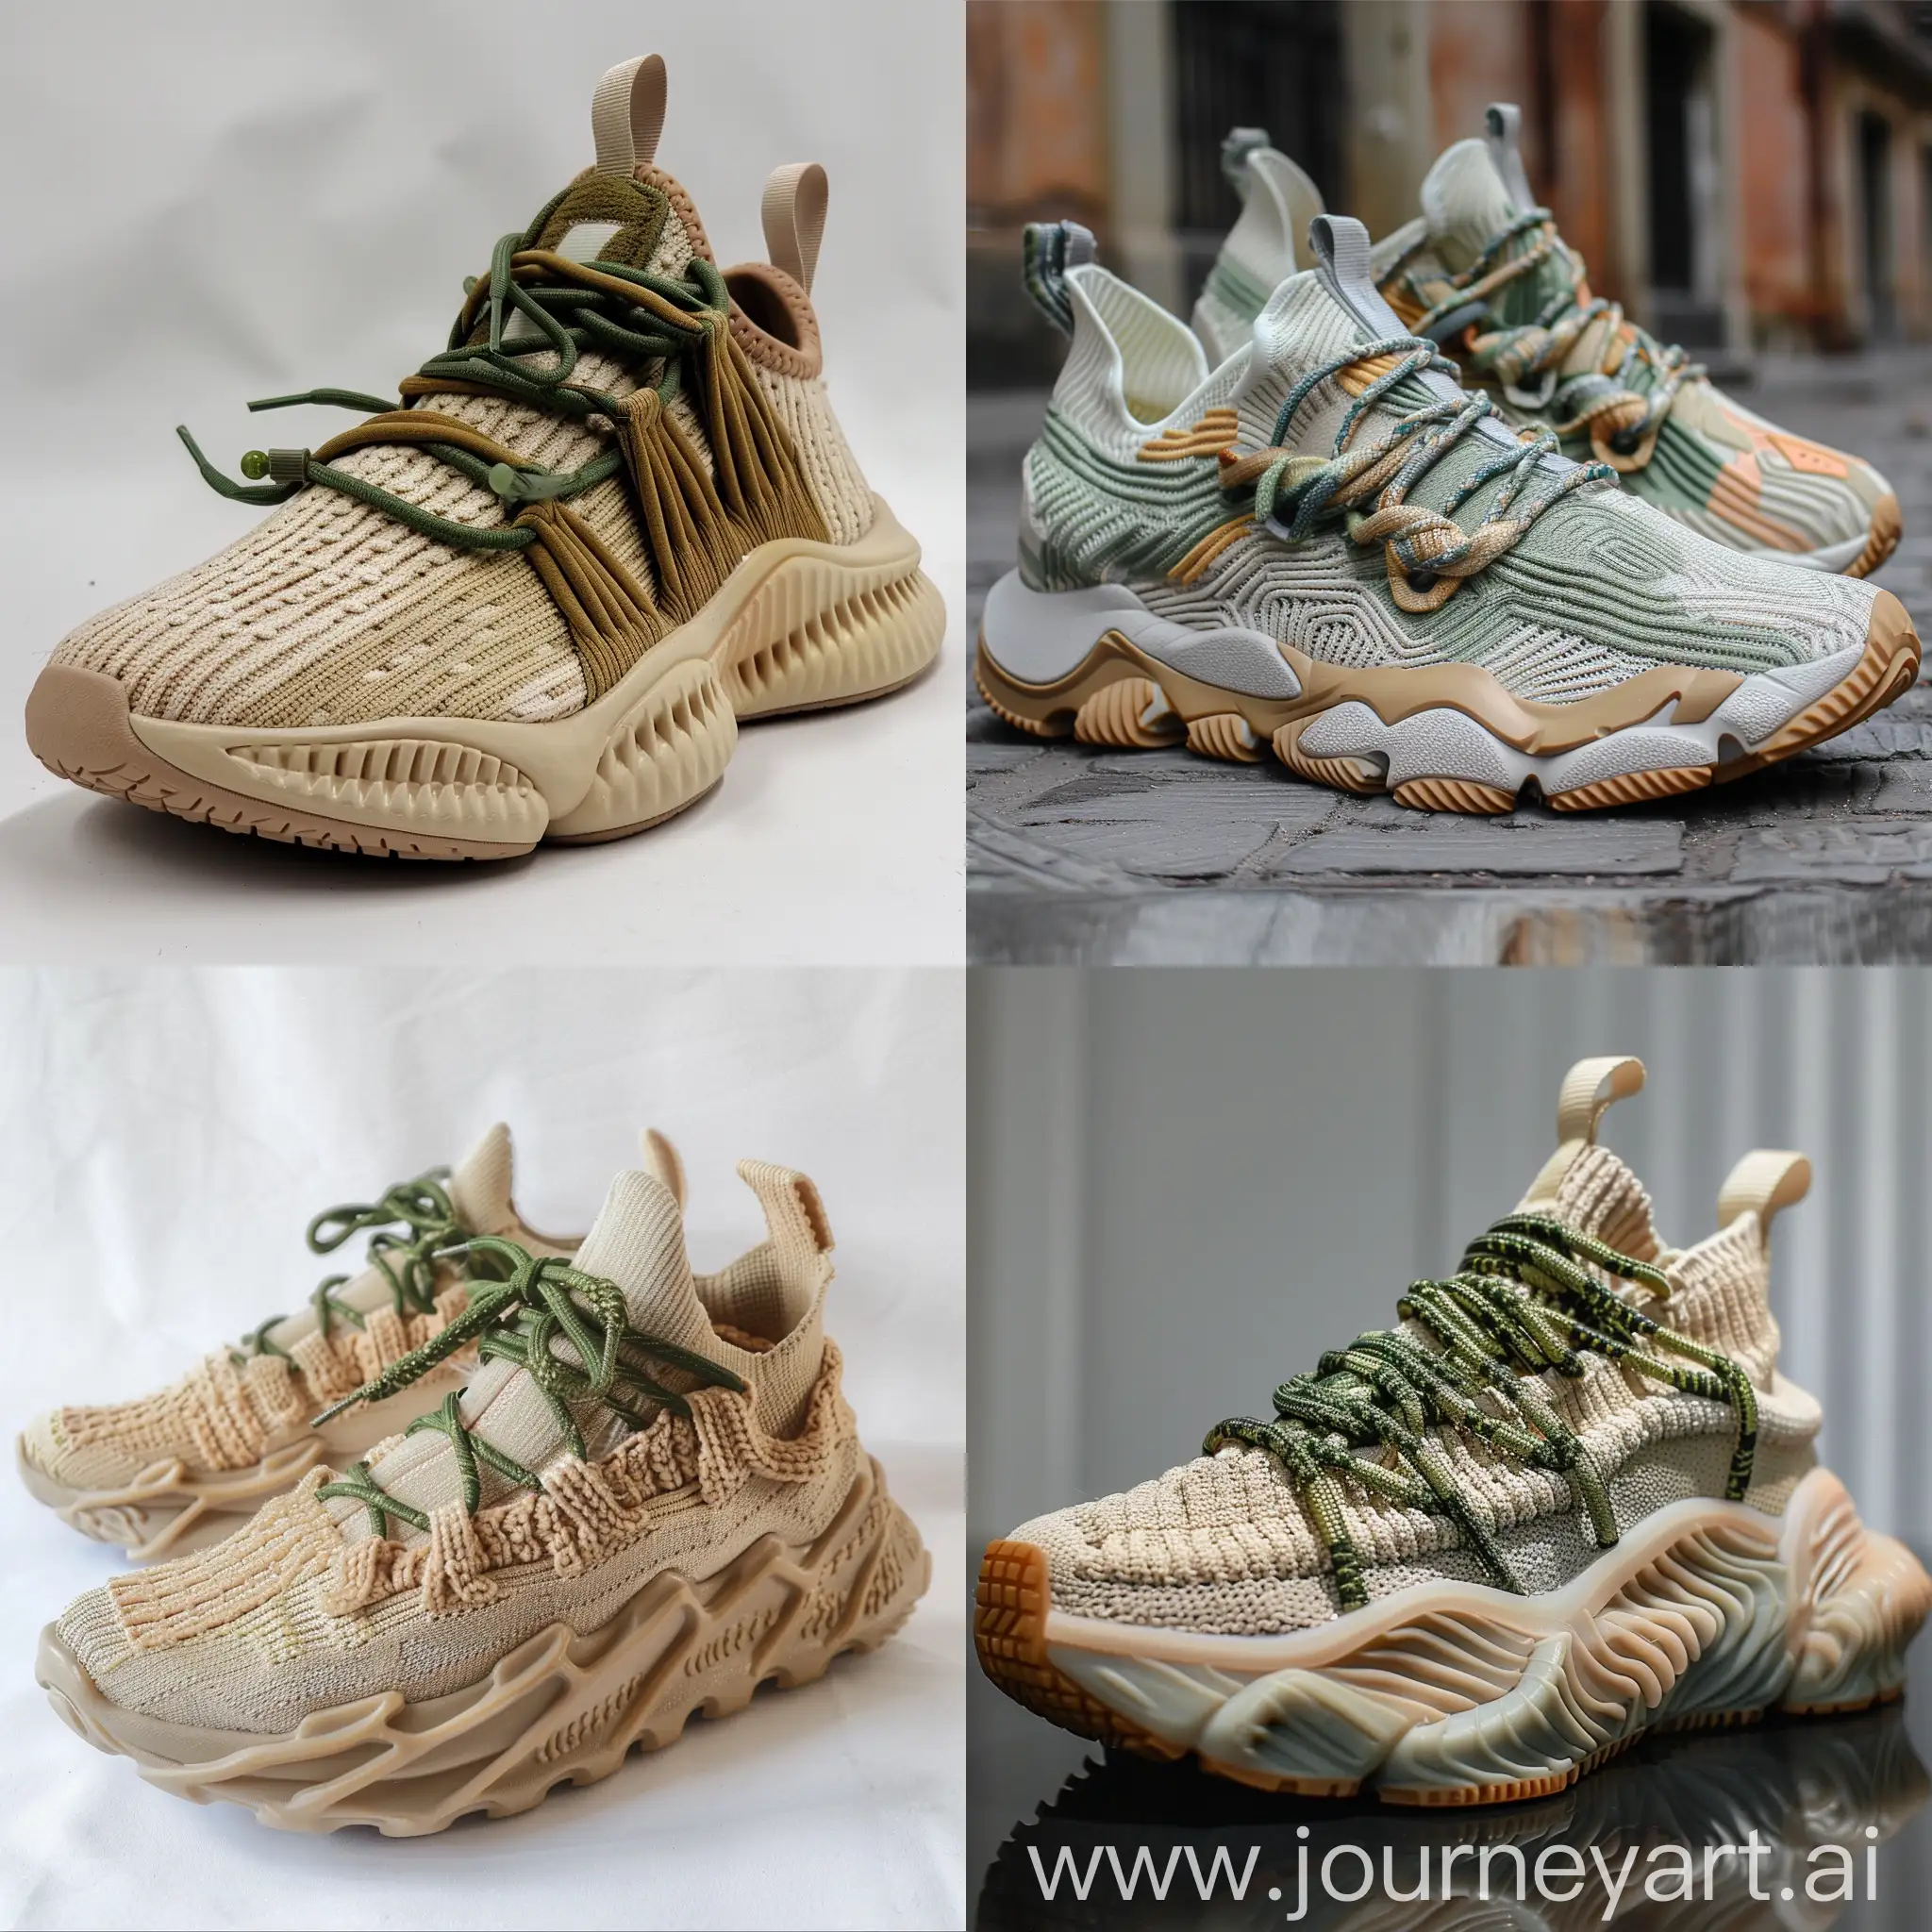 Chunky-Knitted-Sneakers-with-Travis-ScottInspired-Details-in-Beige-and-Green